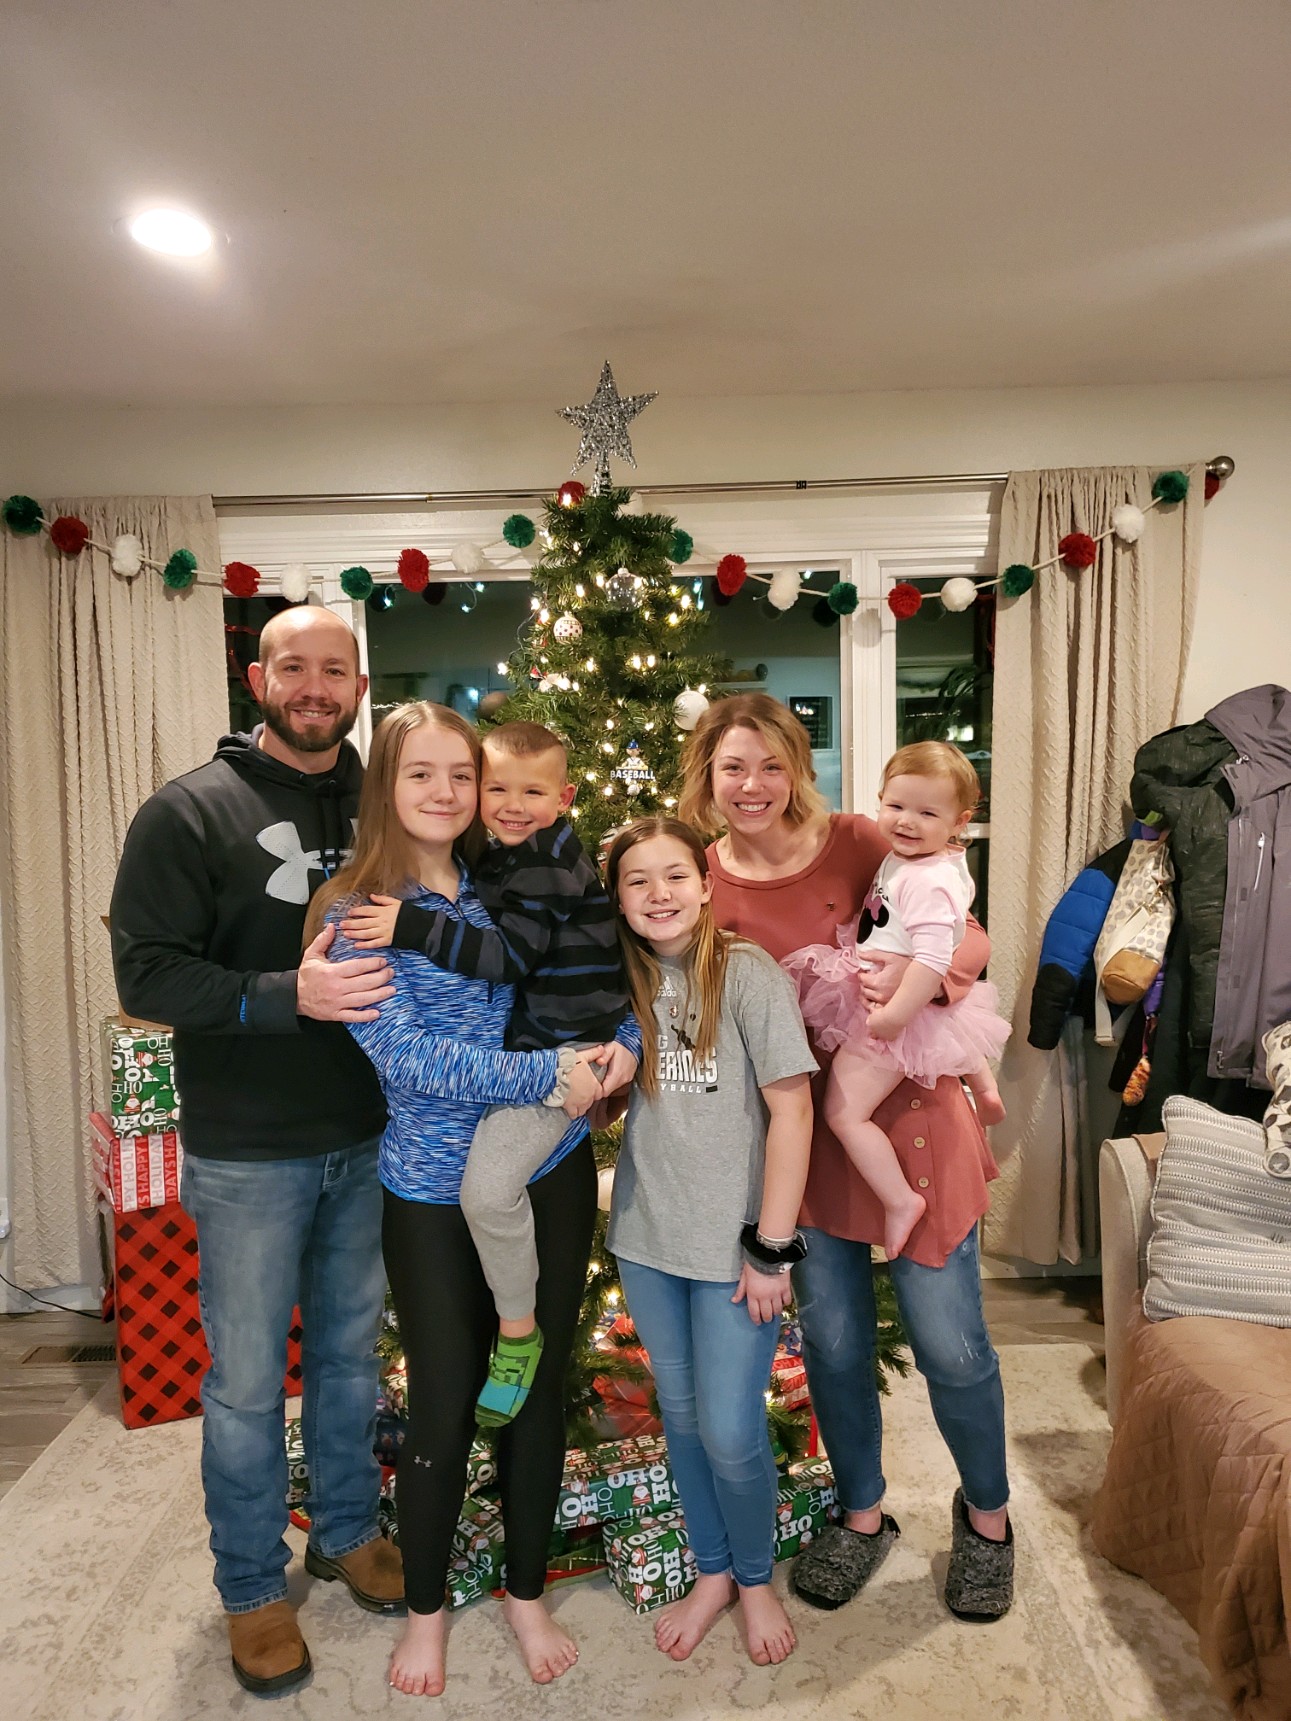 Kate and her family in front of the Christmas tree with presents under it